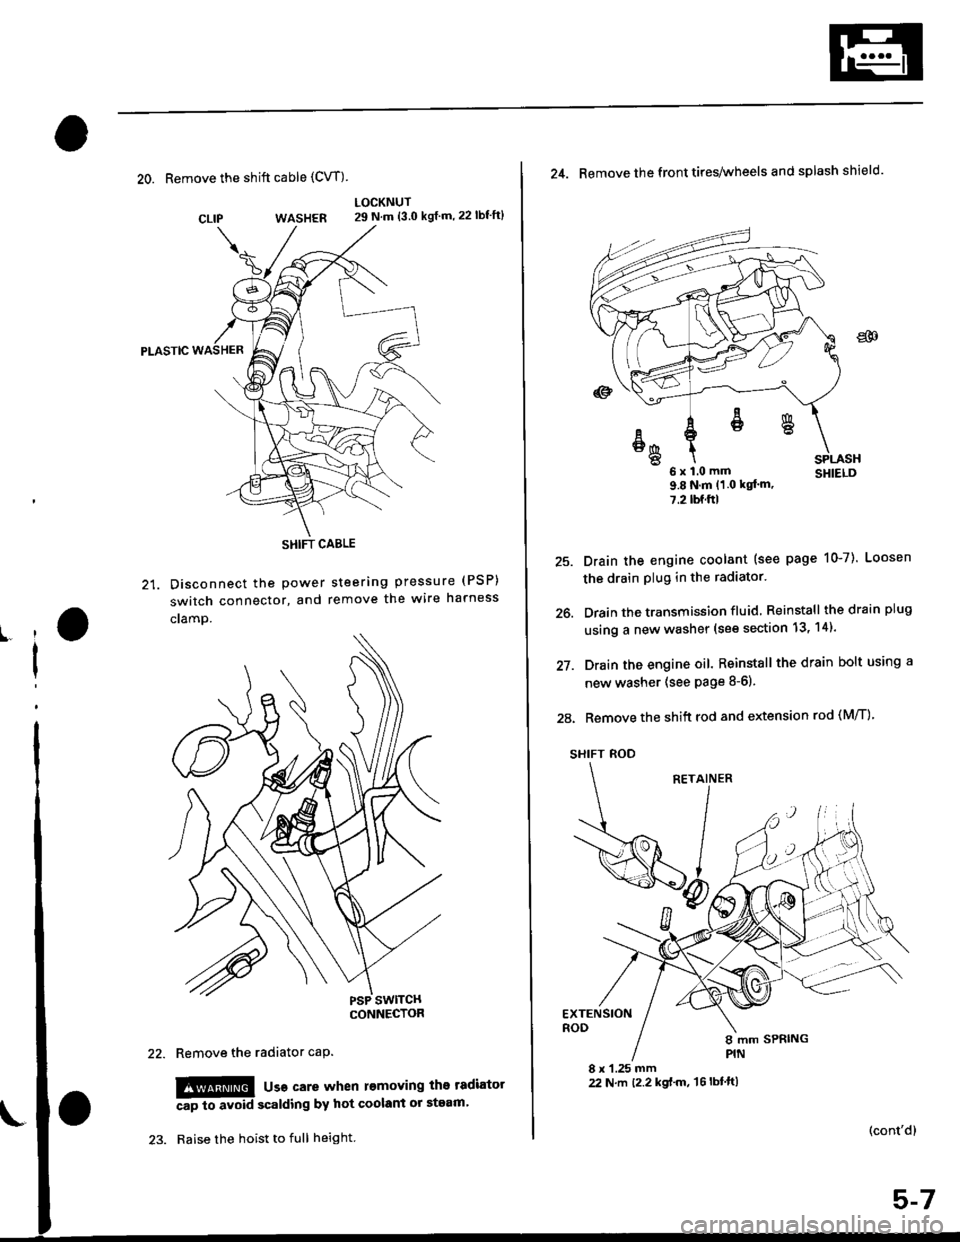 HONDA CIVIC 1999 6.G User Guide 20. Remove the shift cable (CVT)
WASHER
Pt-Aslc
21. Disconnect the Power
switch connector, and
cramp.
LOCKNUT29 N.m {3.0 kgf m,22lbfft}
steering pressure (PSP)
remove the wire harness
CLIP
ll
I
Remov